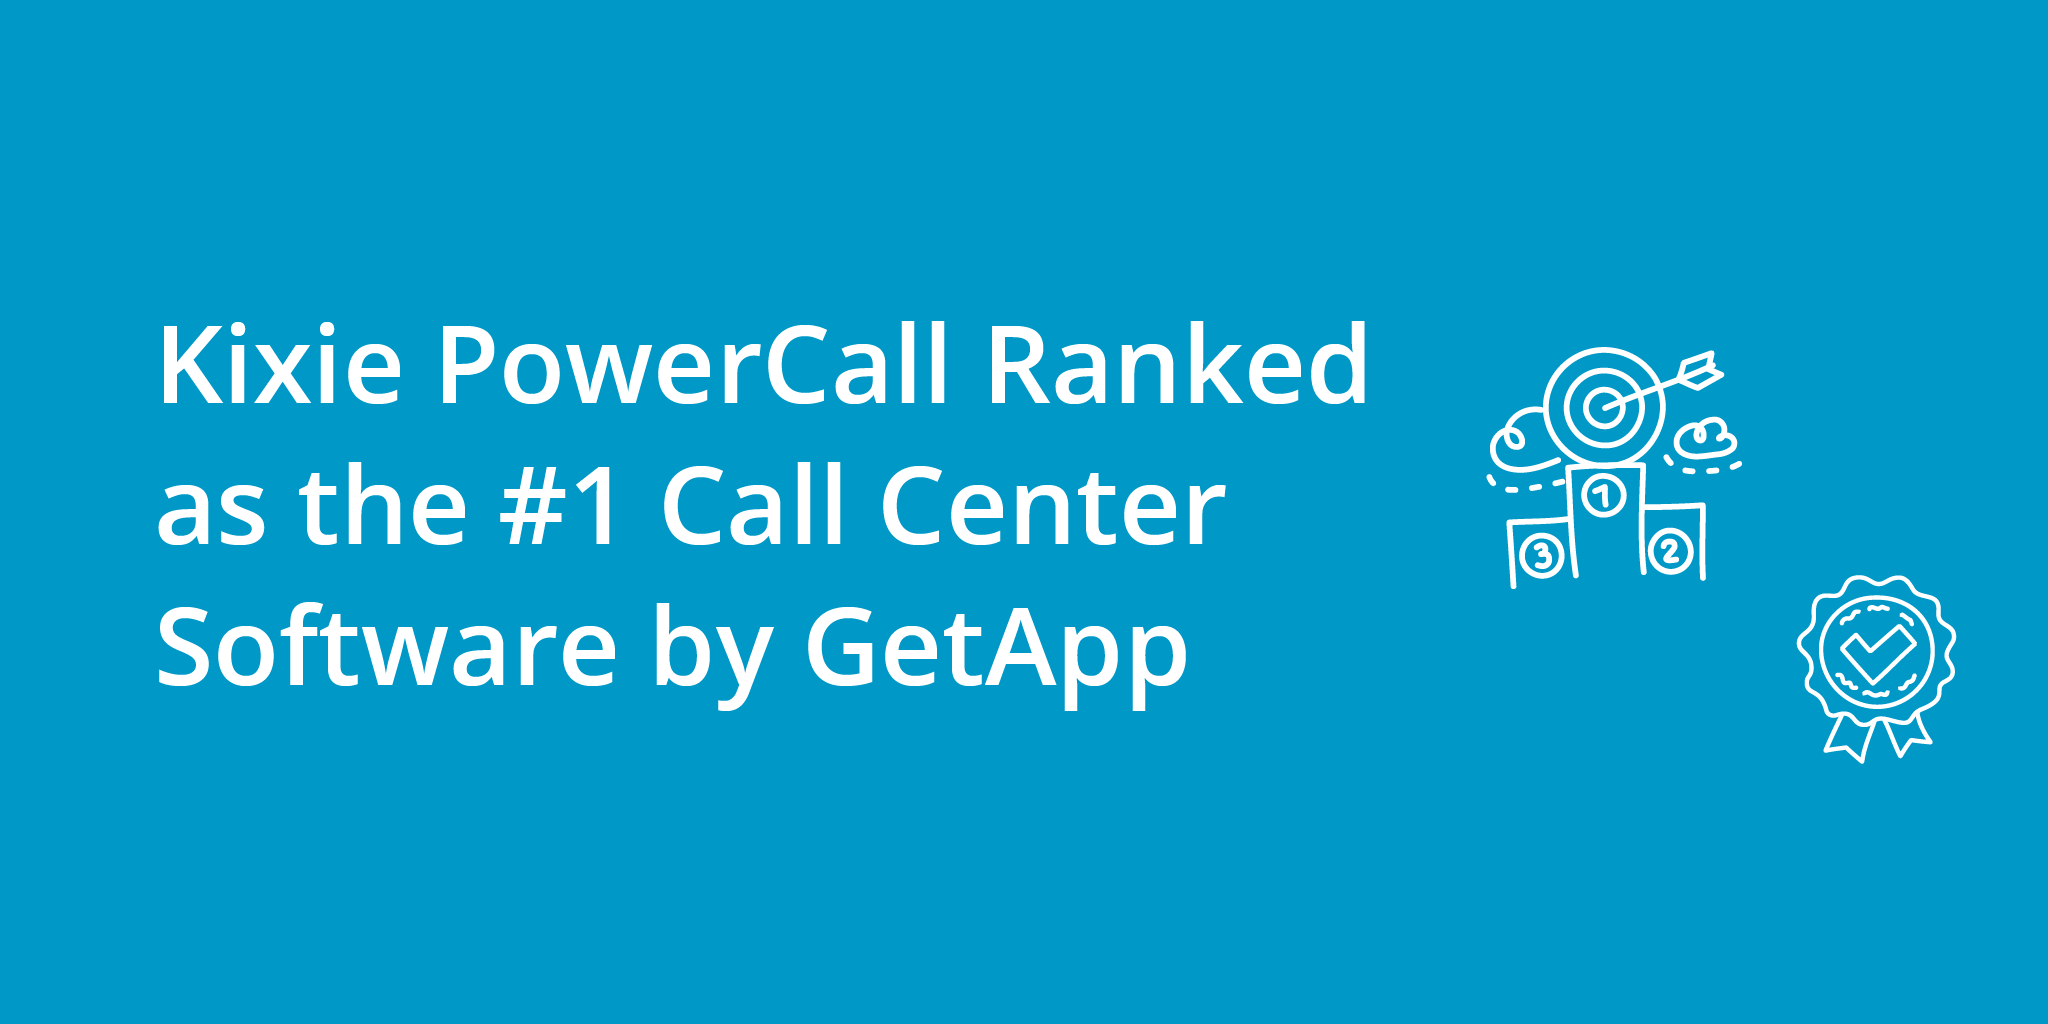 Kixie PowerCall Ranked as the #1 Call Center Software by GetApp | Telephones for business